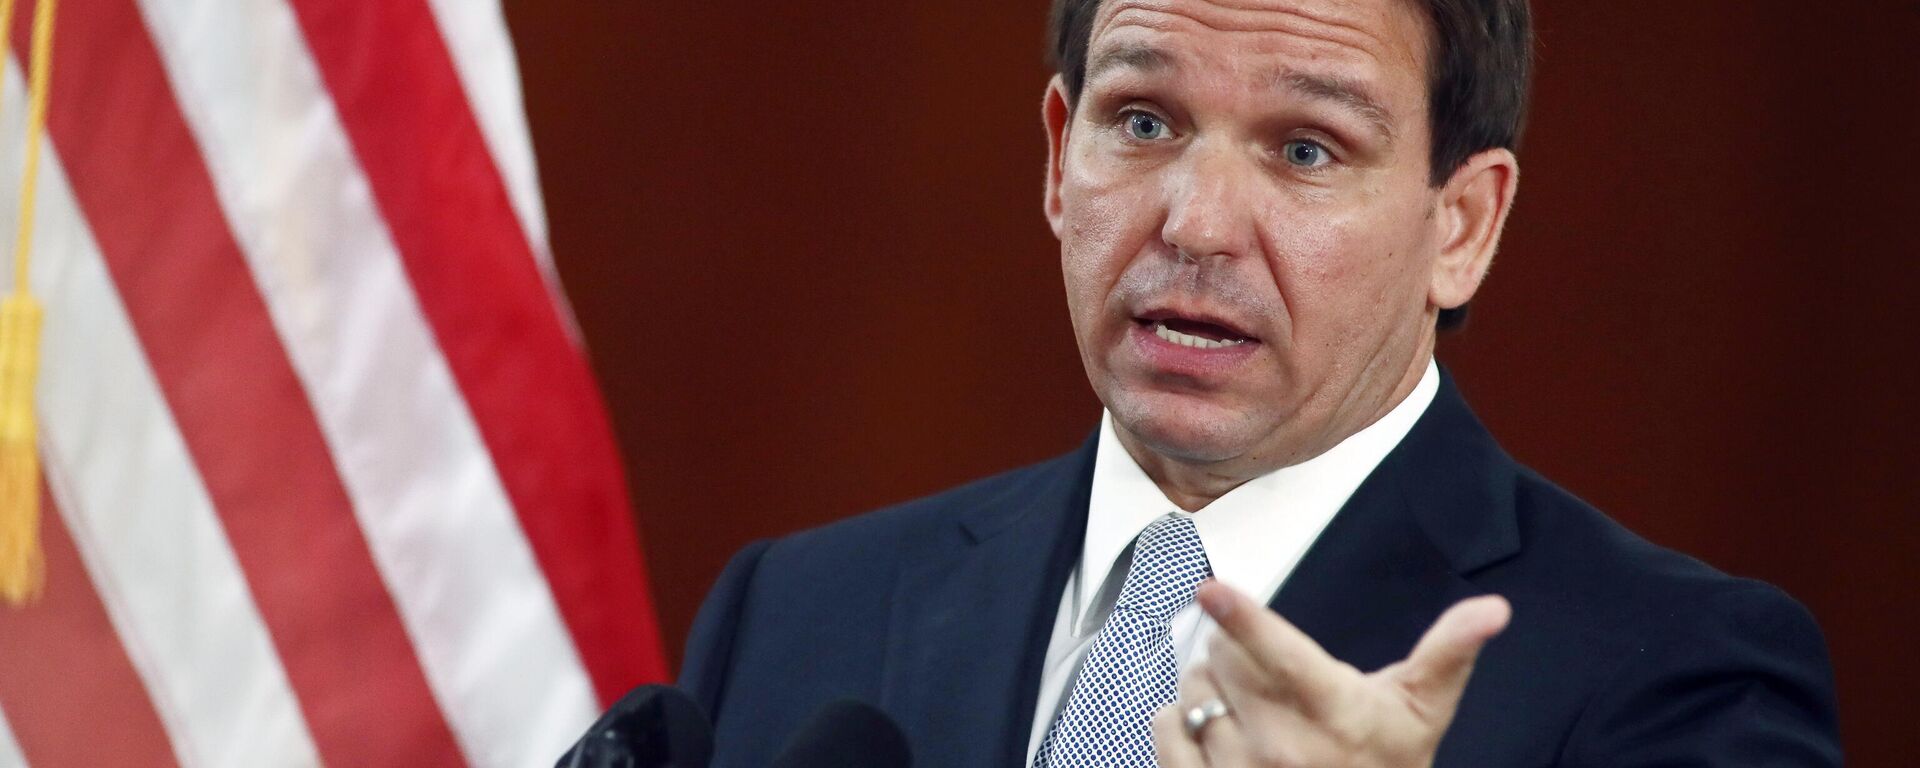 Florida Gov. Ron DeSantis answers questions from the media in the Florida Cabinet following his State of the State address during a joint session of the Senate and House of Representatives Tuesday, March 7, 2023, at the Capitol in Tallahassee, Fla. - Sputnik International, 1920, 05.08.2023